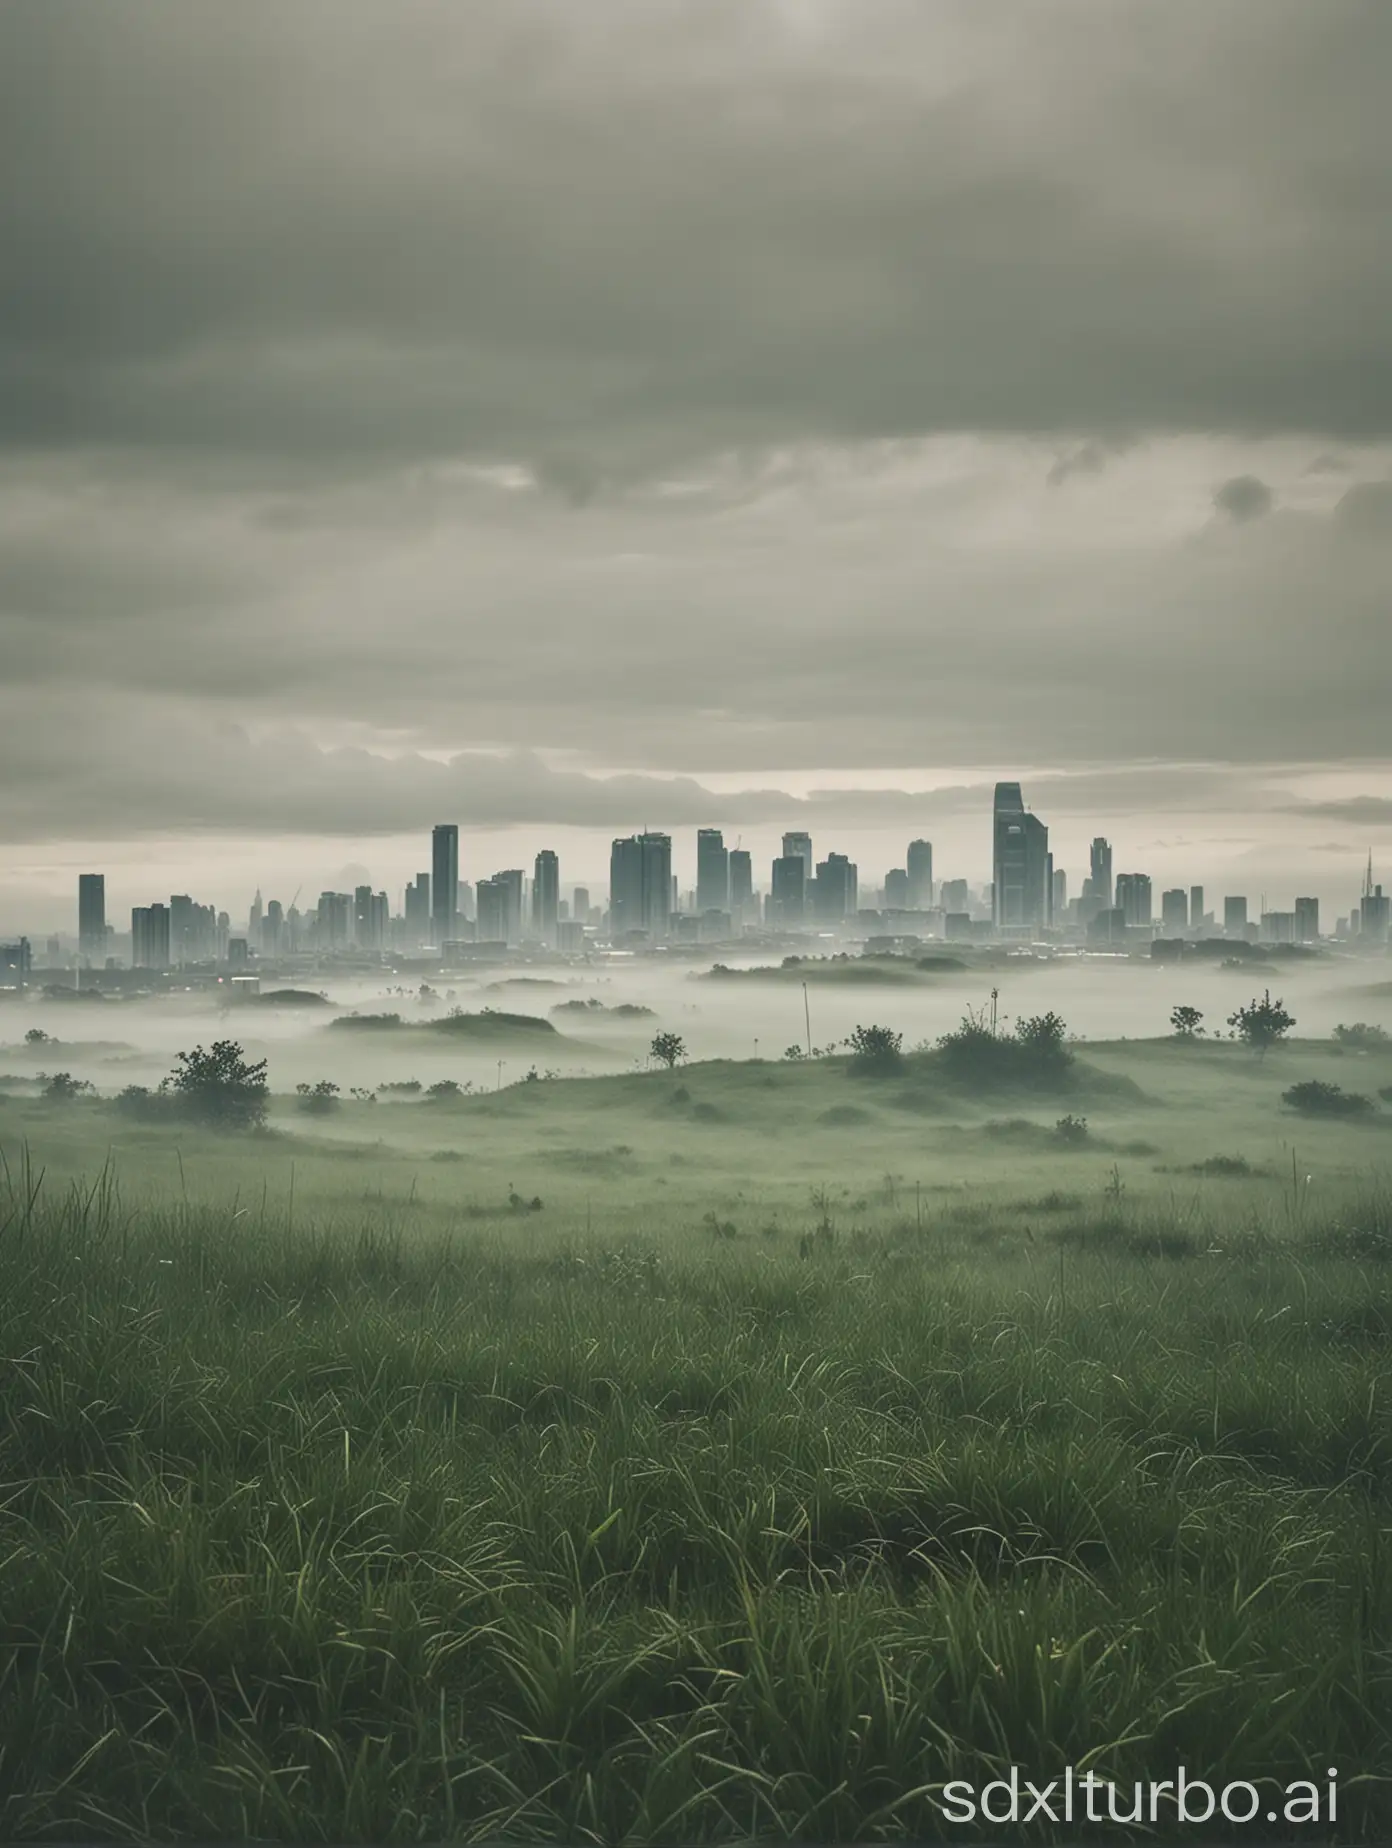 A grassland, clouds block a planet in the sky, the end of the grassland is a future city, fog blocking the city, the city has ultra-high buildings, the distant city has spaceships, cloudy, rainy days, cloudy days, a real photo pentax 55mm f/1.6 helios-44m